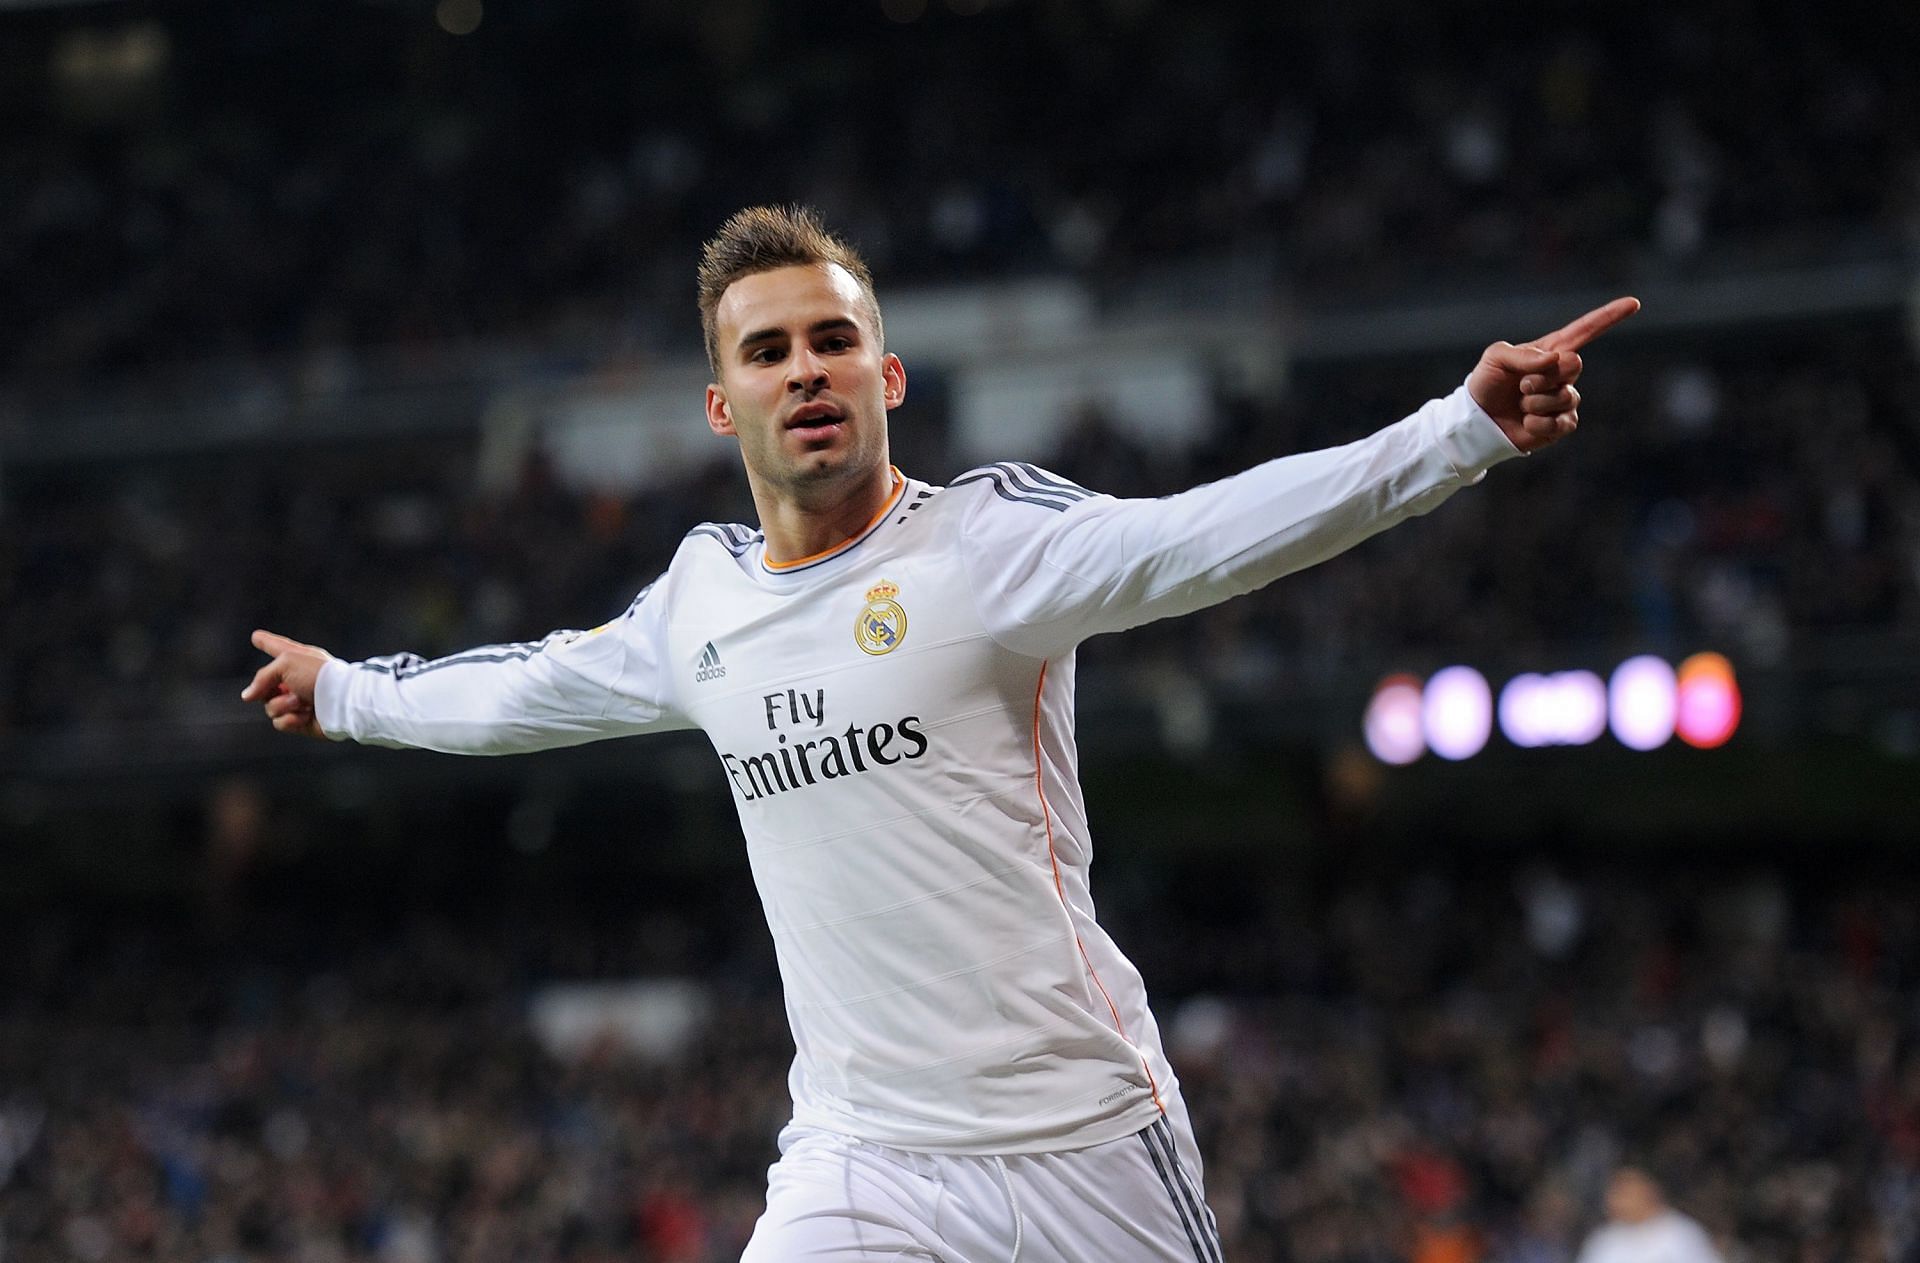 Jese was supposed to be the next big thing